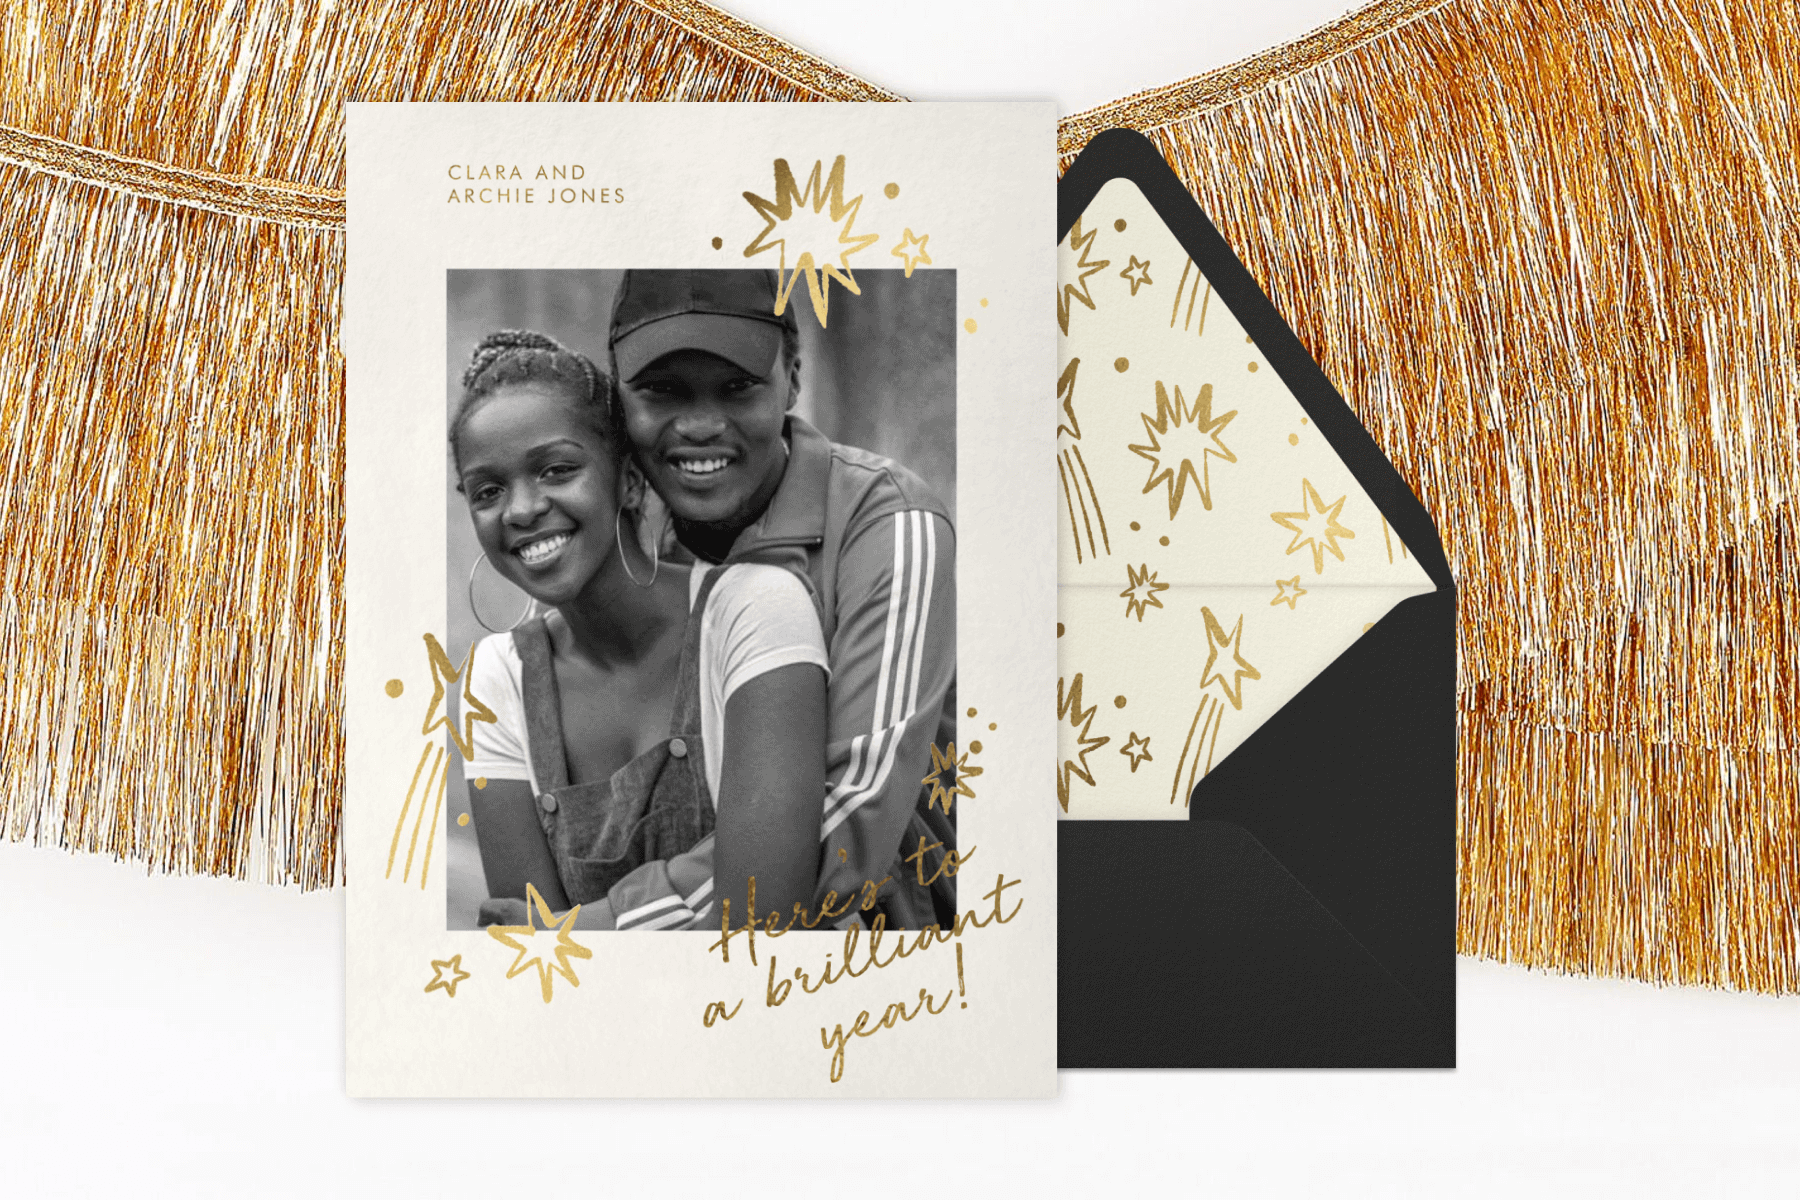 A photo card with gold star details and the script "Here's to a brilliant year!"